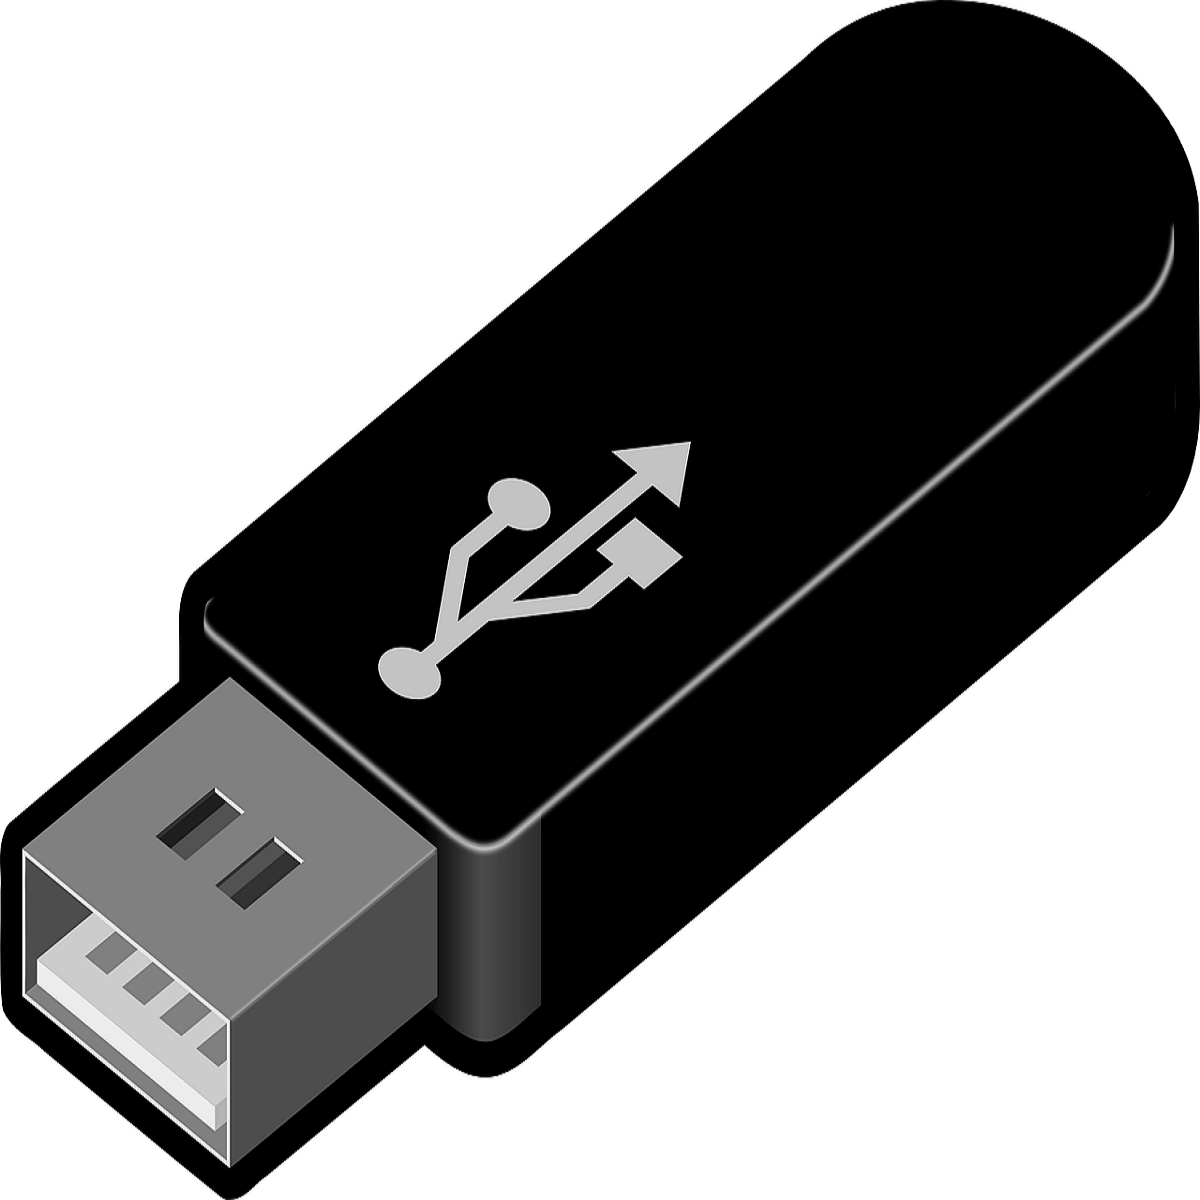 windows is unable to stop the device usb mass storage